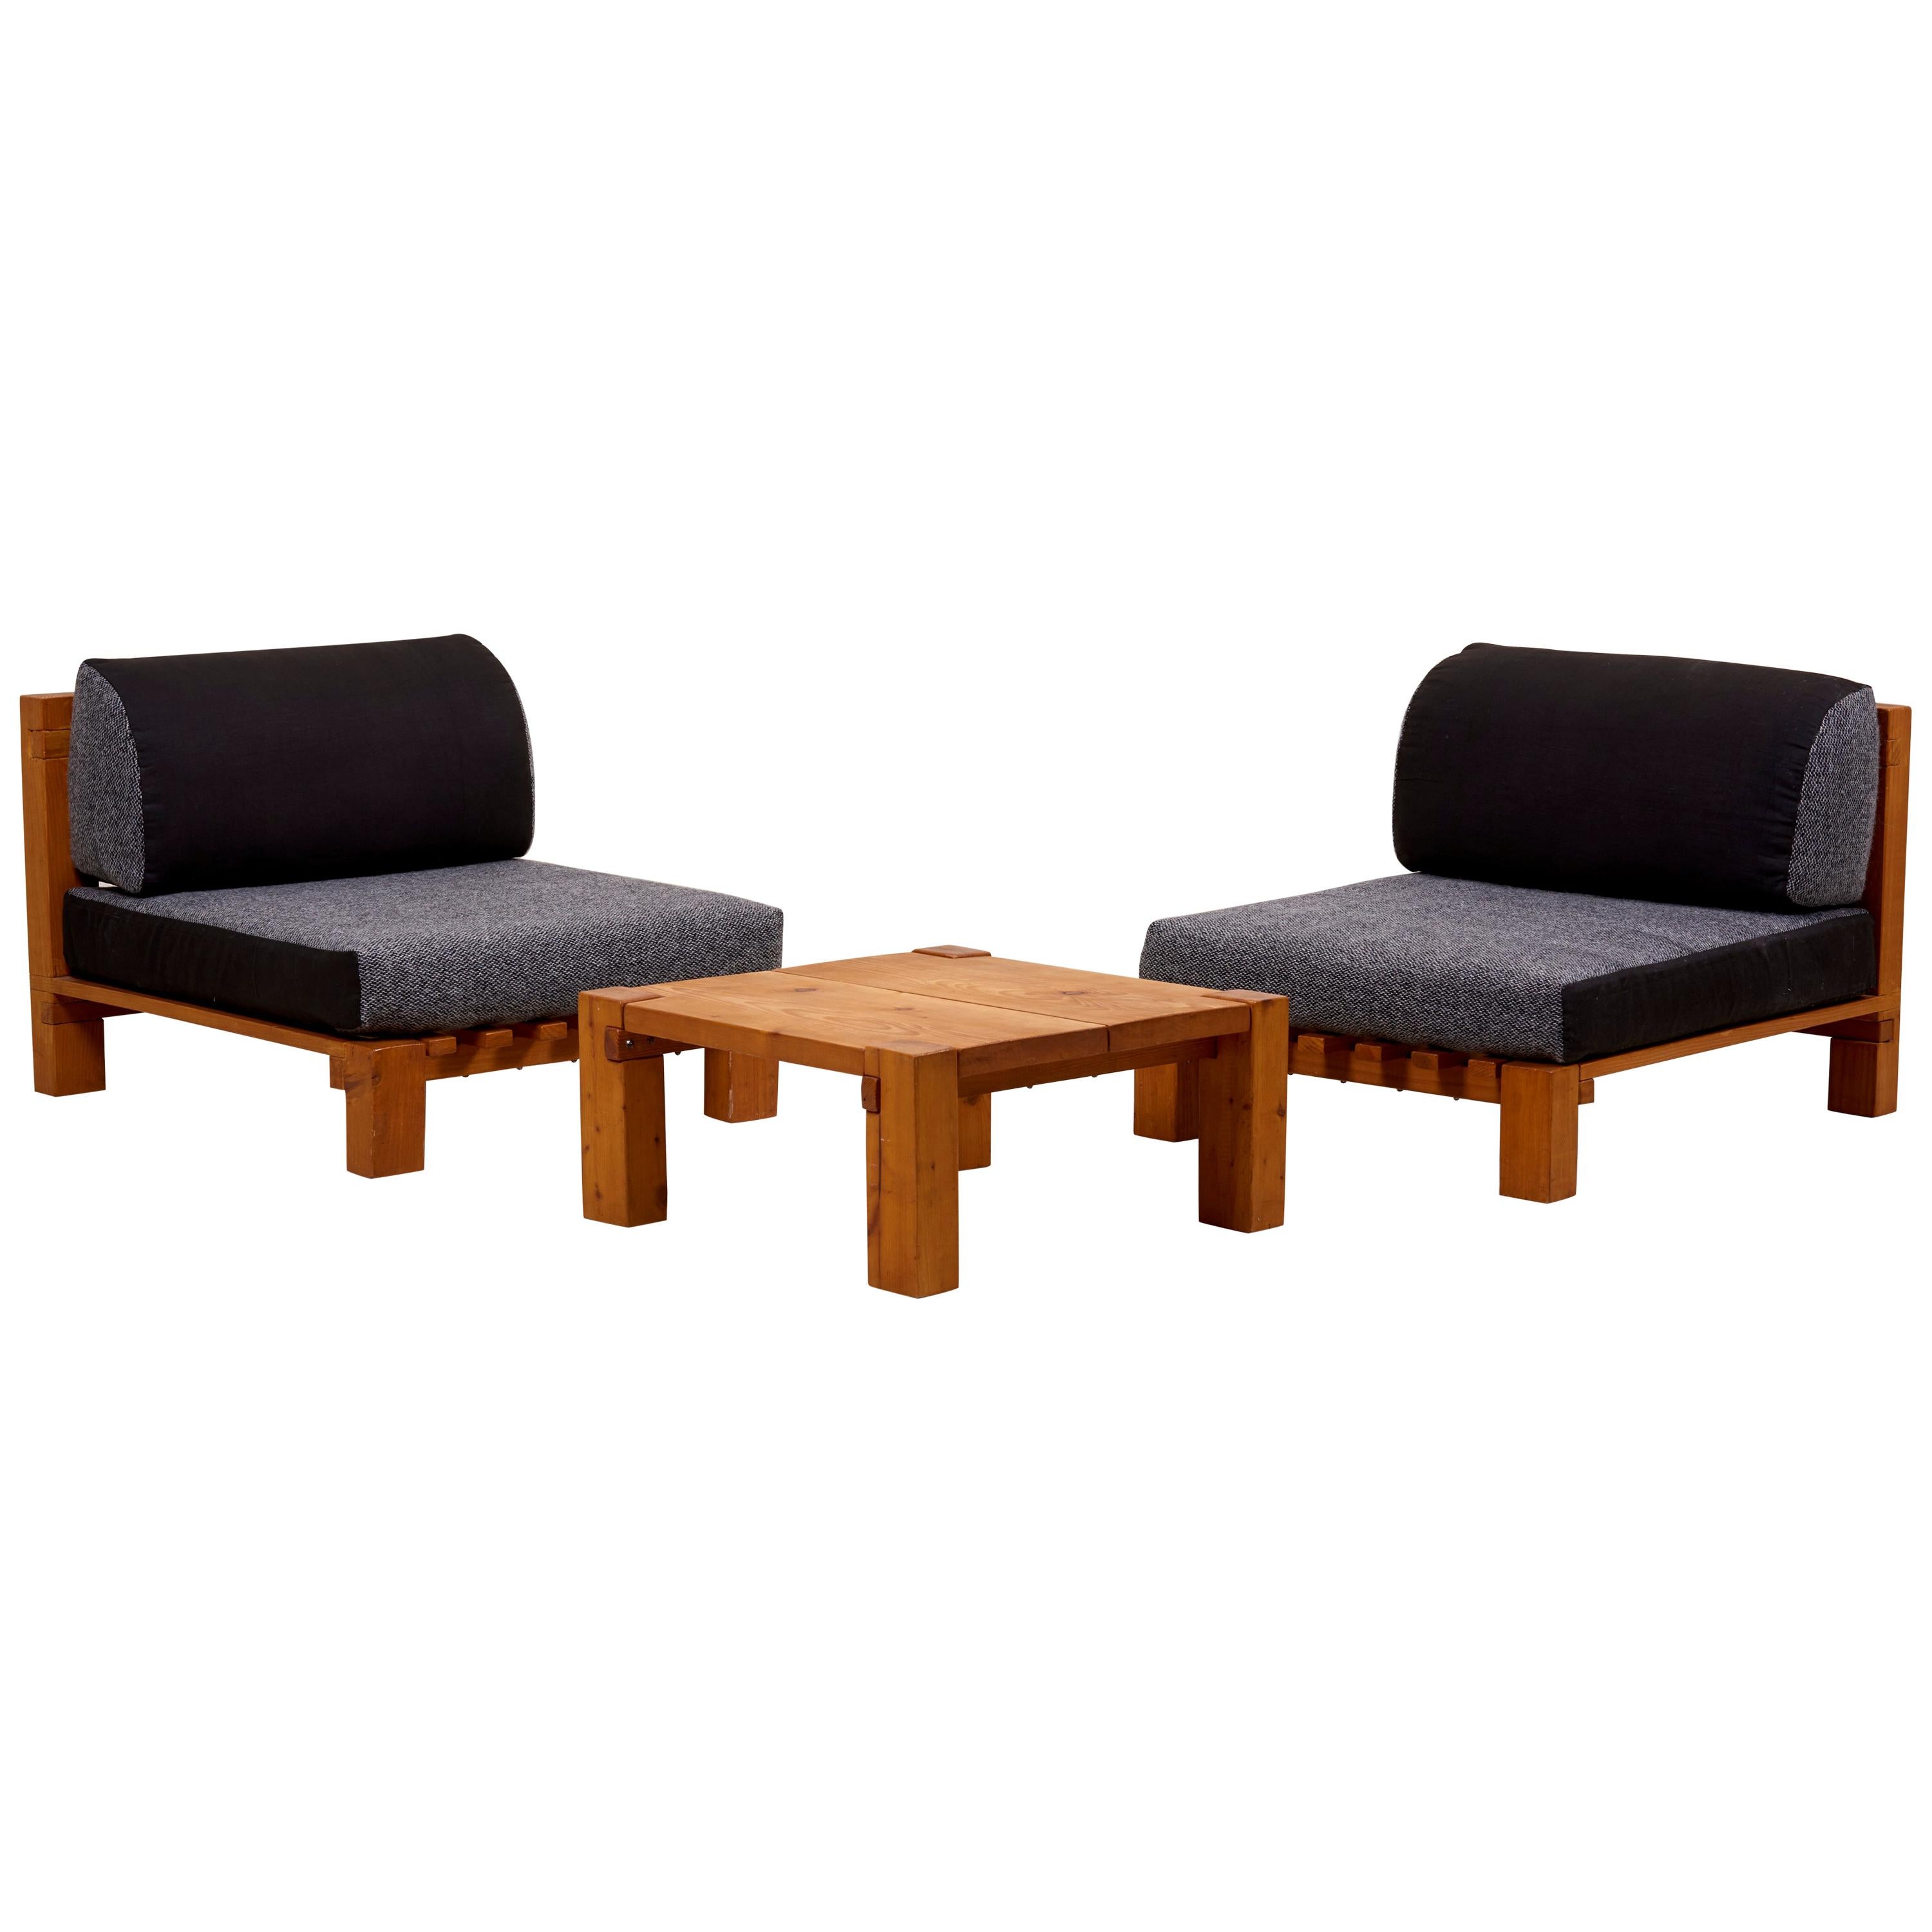 Set of Two Lounge Chairs and Coffee Table Perriand Style, France, 1960s